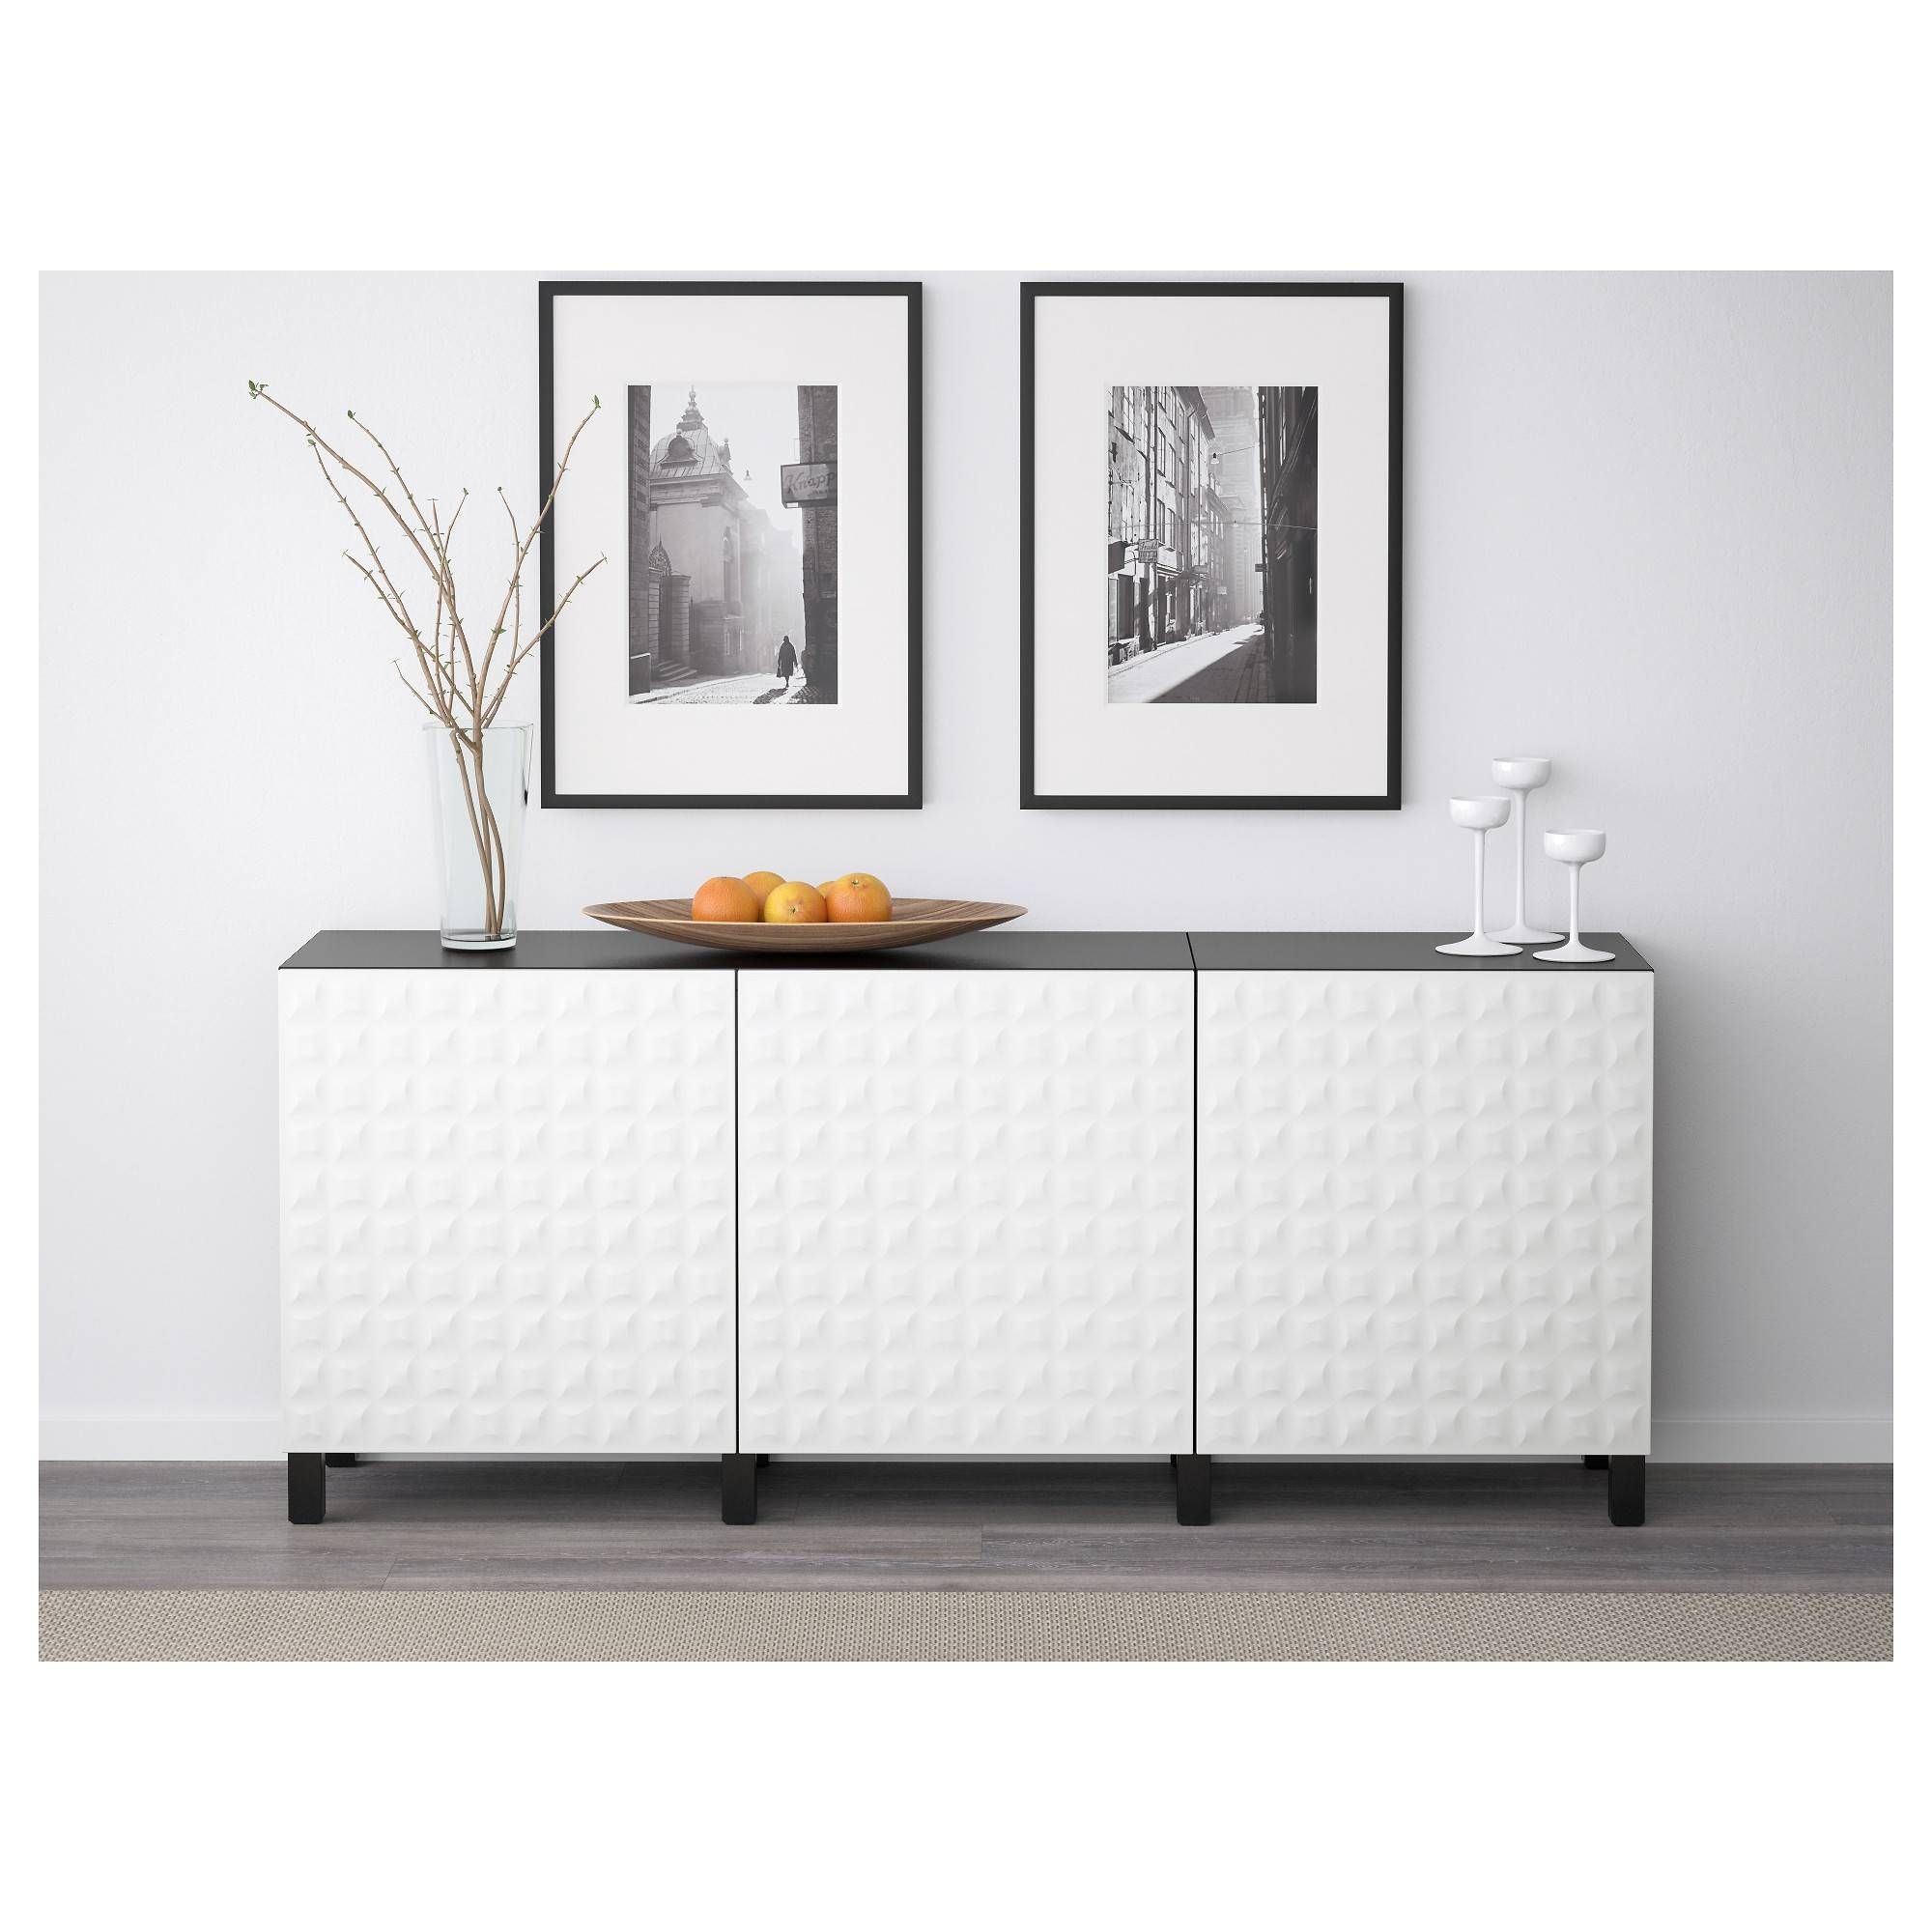 Bestå Storage Combination With Doors – White/selsviken High Gloss Within Latest Ikea Besta Sideboards (View 5 of 15)